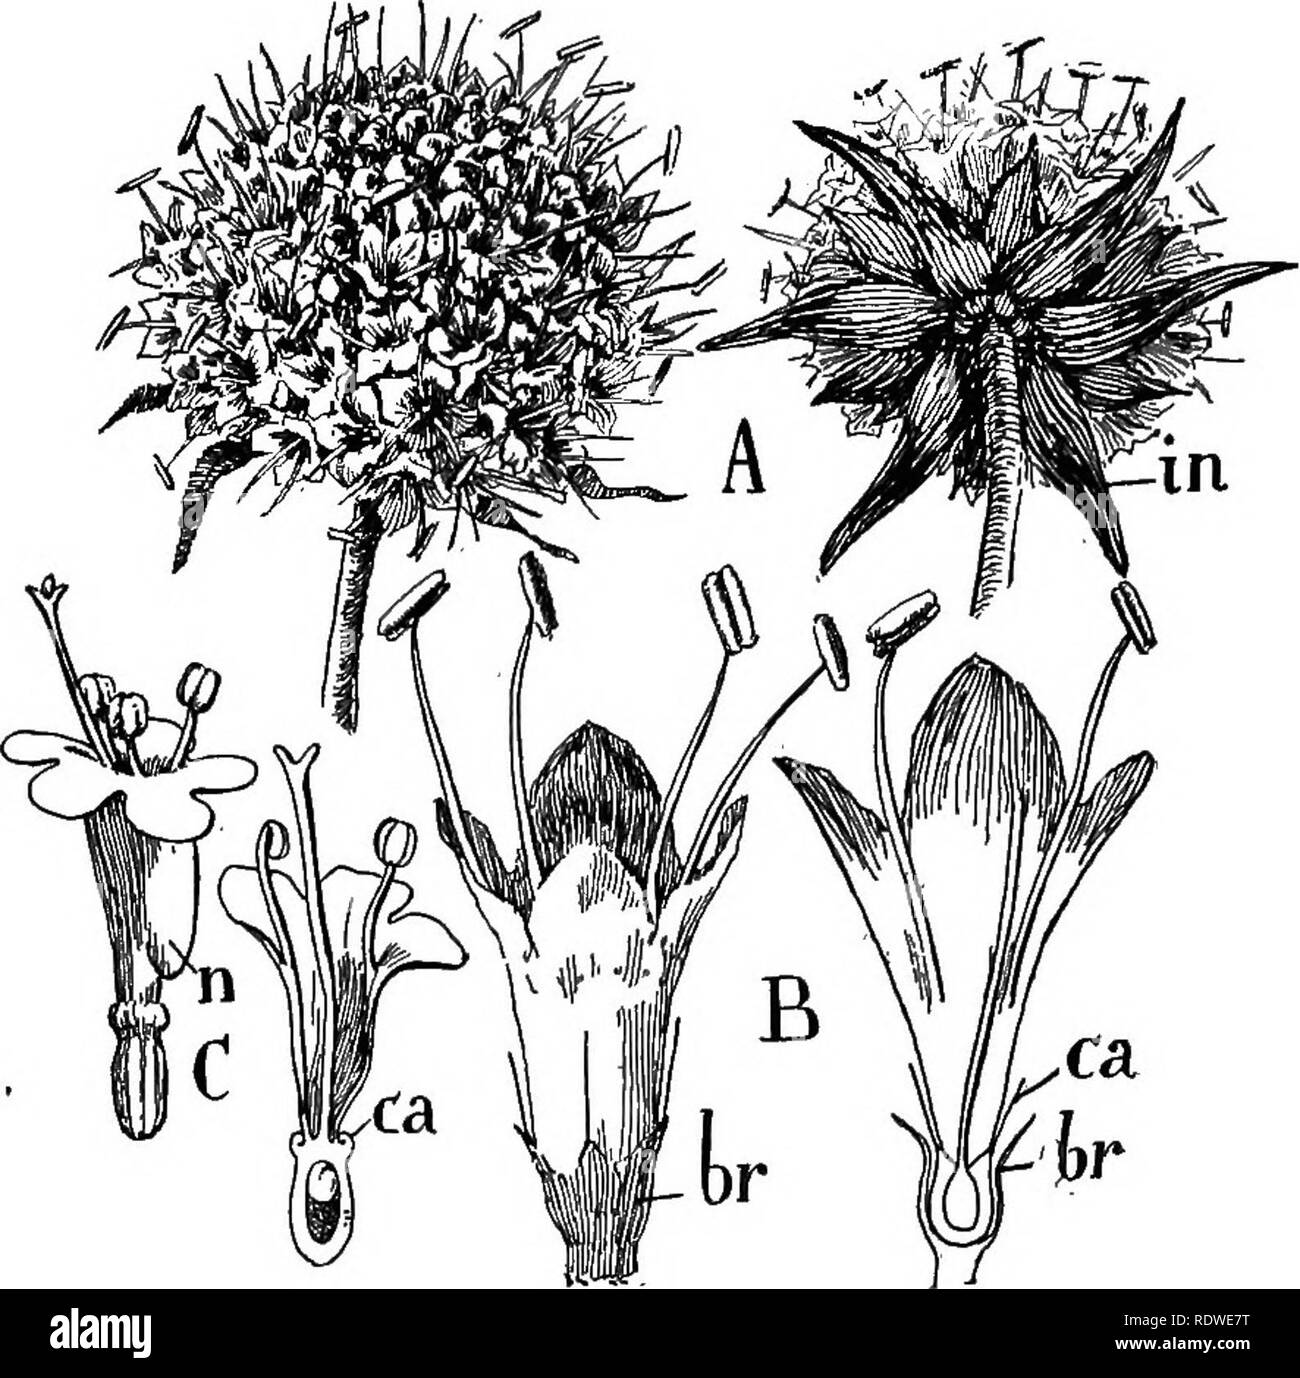 . Nature and development of plants. Botany. DEVELOPMENT OF PLANTS 483 tended by modified leaves, the involucre (Fig. 336) and the pistils are reduced to a single fertile carpel with two-lobed style. These variations will become very prominent in the next order. The Rubiajes are an important tropical group and furnish the coffee {Coffea) and the cinchonas which yield such drugs as quinine and calisaya.. Fig. 336. Advanced forms of the Rubiales: A, inflorescence of Scabiosa, at the right showing the involucre, in. B, a siilgle flower enlarged, show- ing the somewhat irregular corolla. At the rig Stock Photo